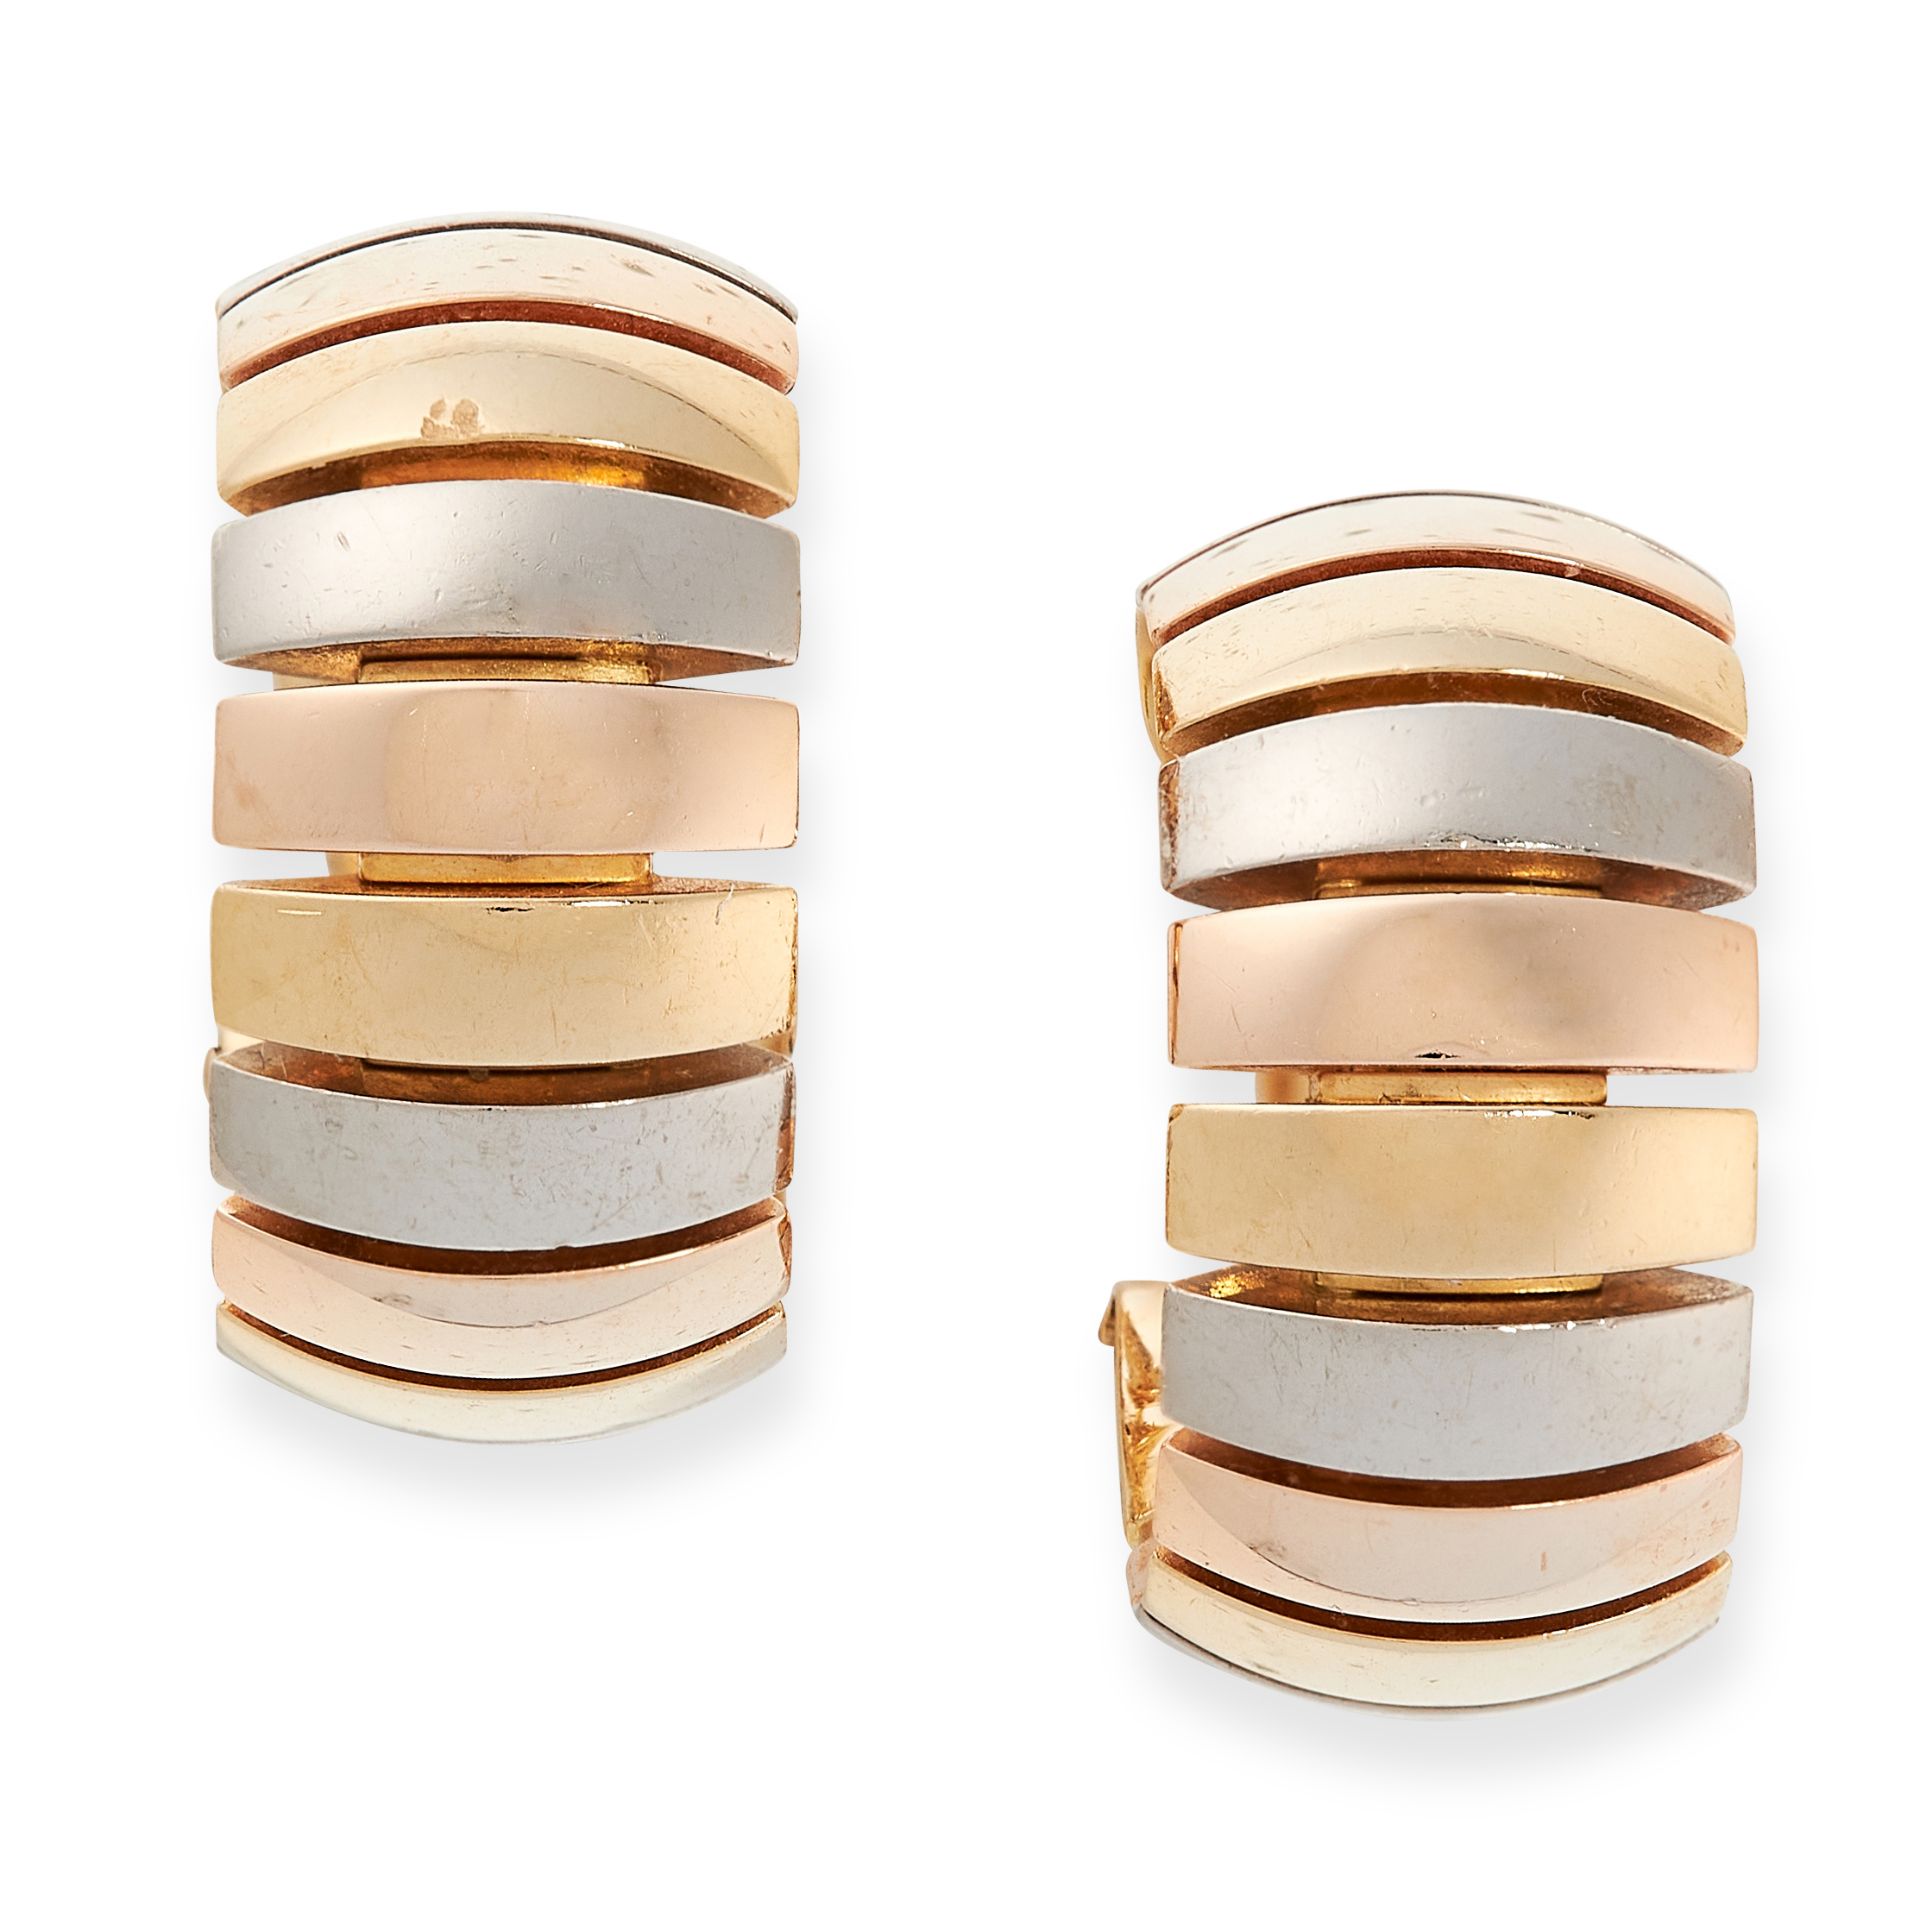 A PAIR OF TRINITY DE CARTIER HOOP EARRINGS, CARTIER in 18ct yellow, white and rose gold, each